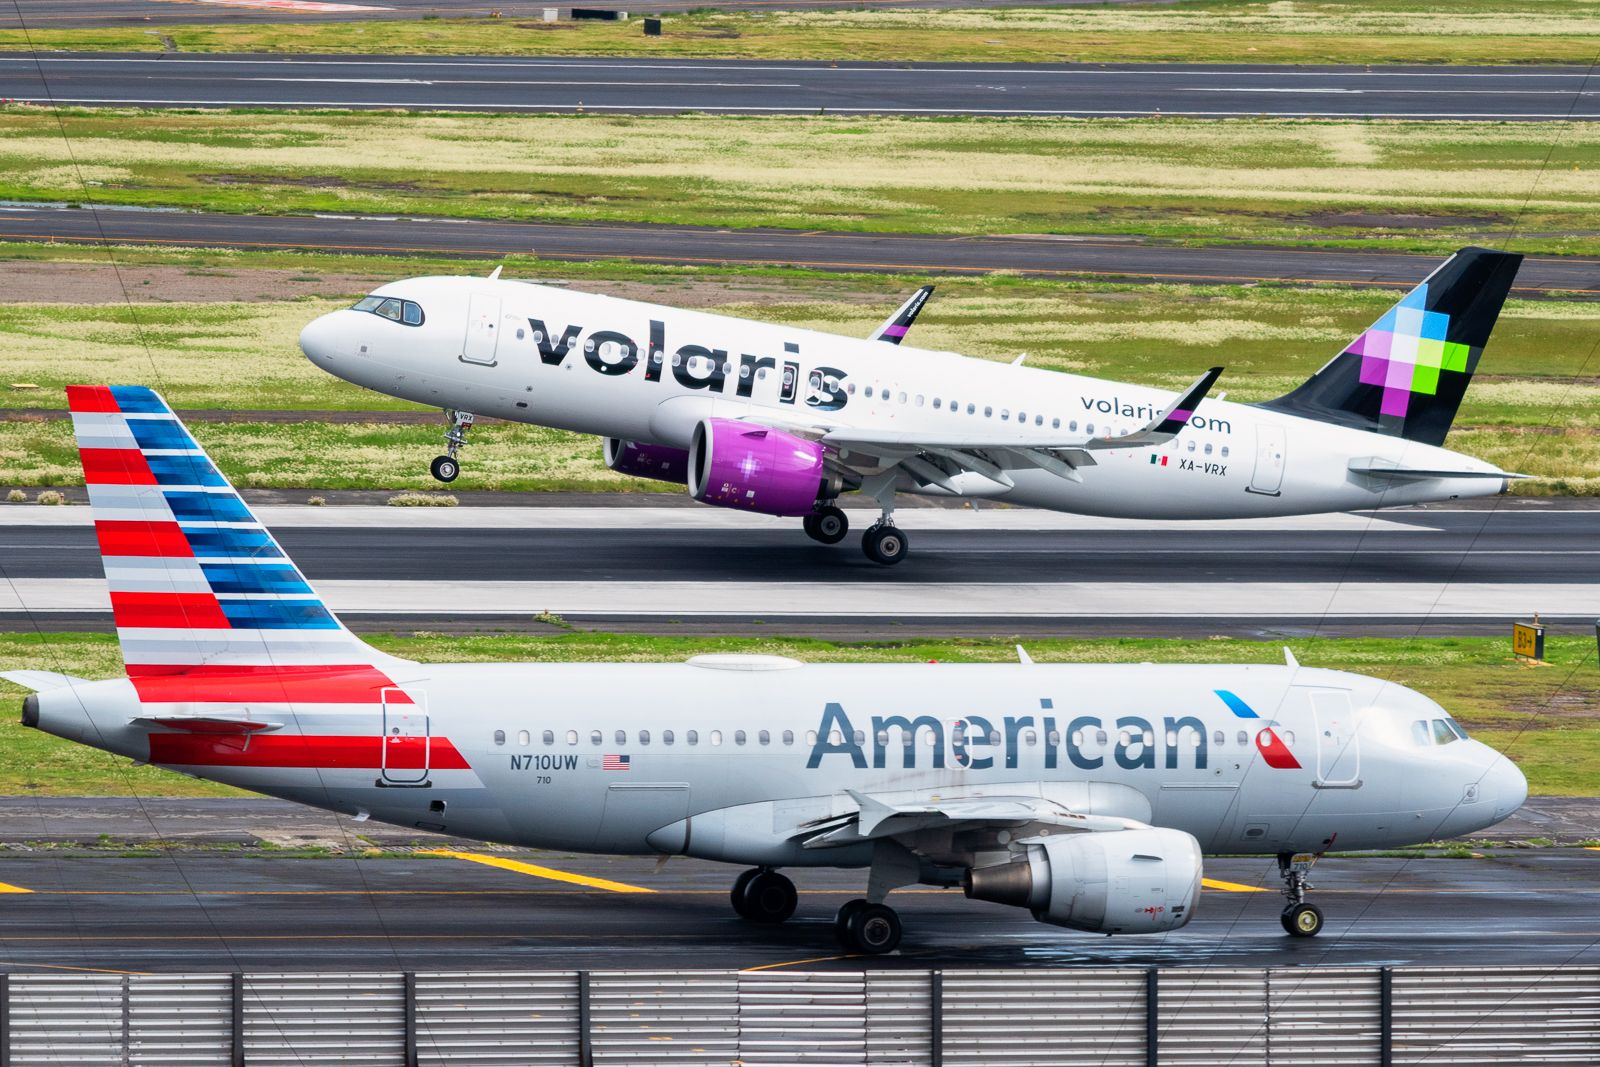 An American Airlines Airbus A319 taxiing in Mexico City and a Volaris aircraft in the back.